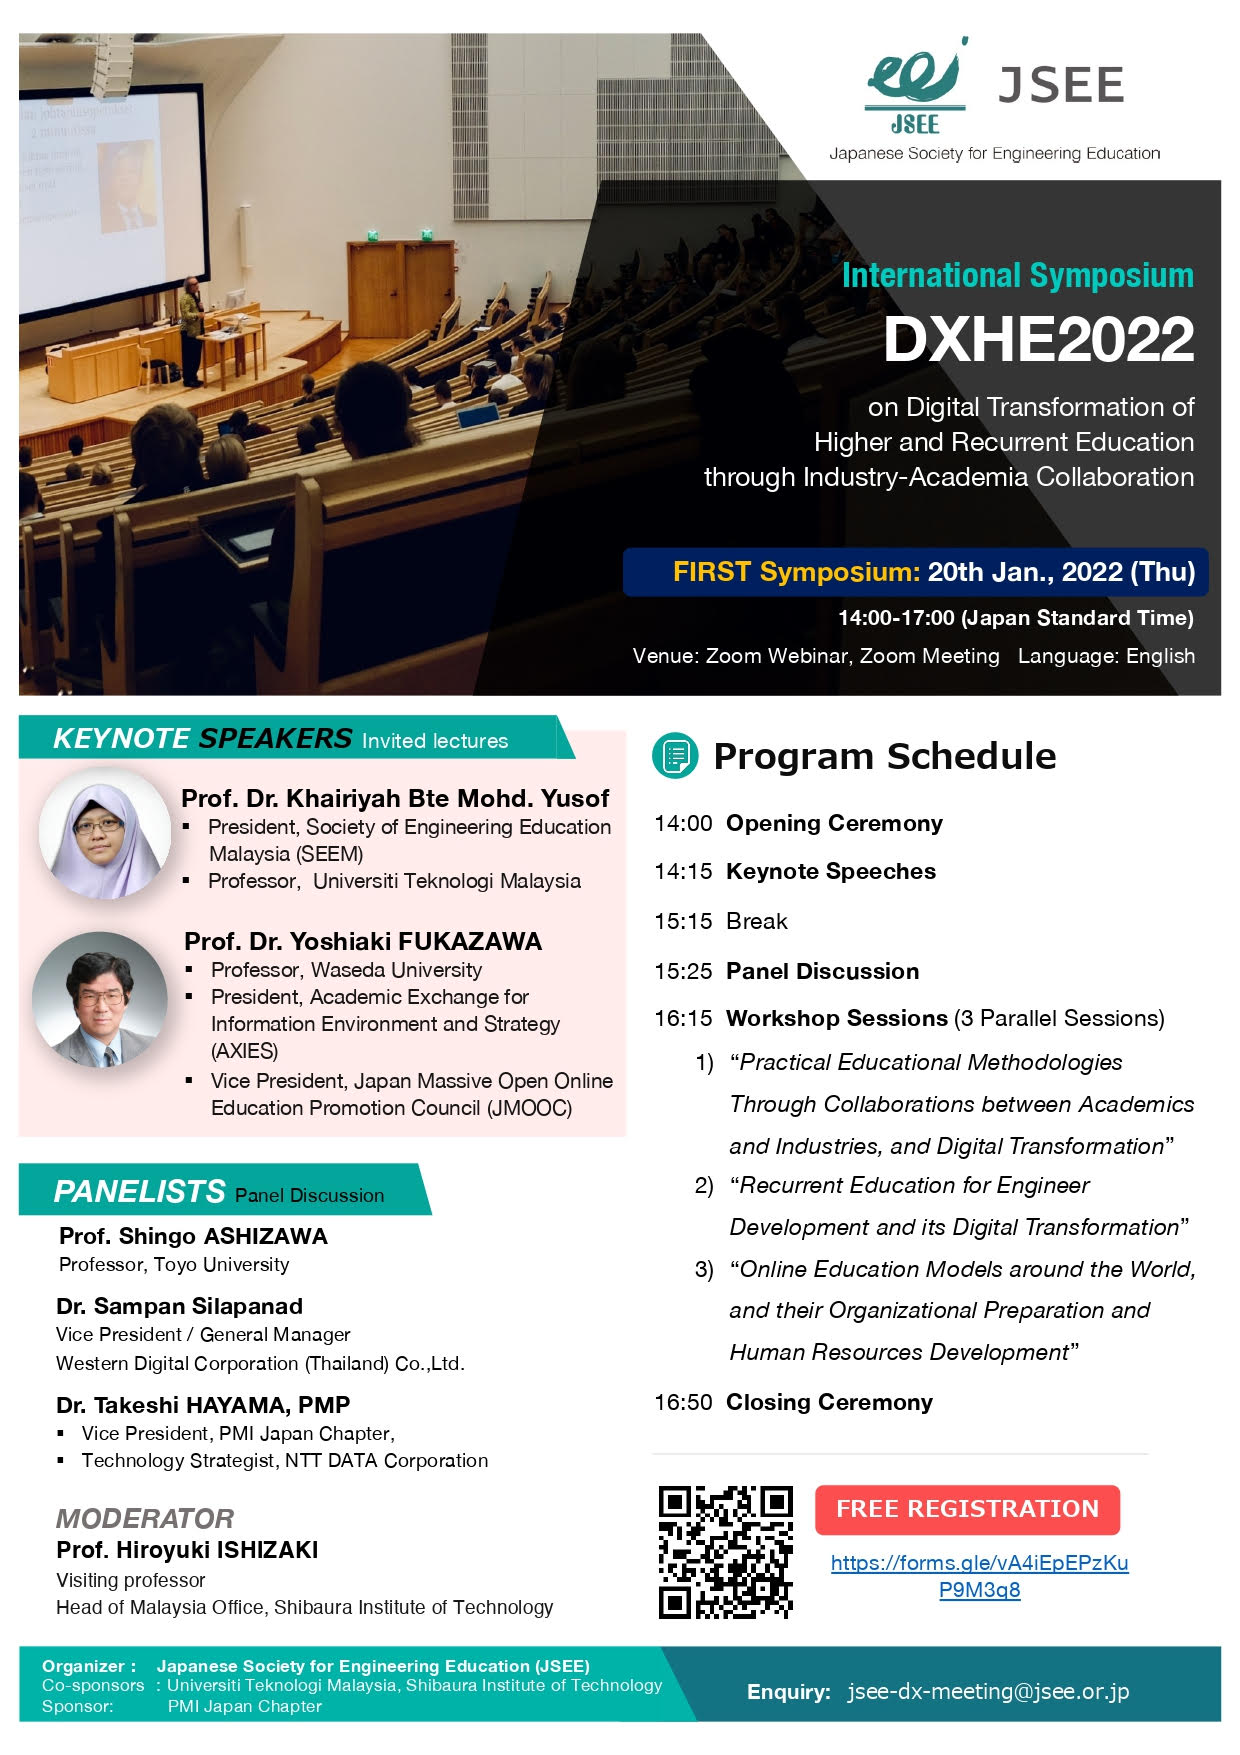 SOFT REMINDER: ​​INVITATION TO PARTICIPATE IN INTERNATIONAL SYMPOSIUM FOR DIGITAL TRANSFORMATION OF HIGHER AND RECURRENT EDUCATION THROUGH INDUSTRY ACADEMIA COLLABORATION (DXHE2022)